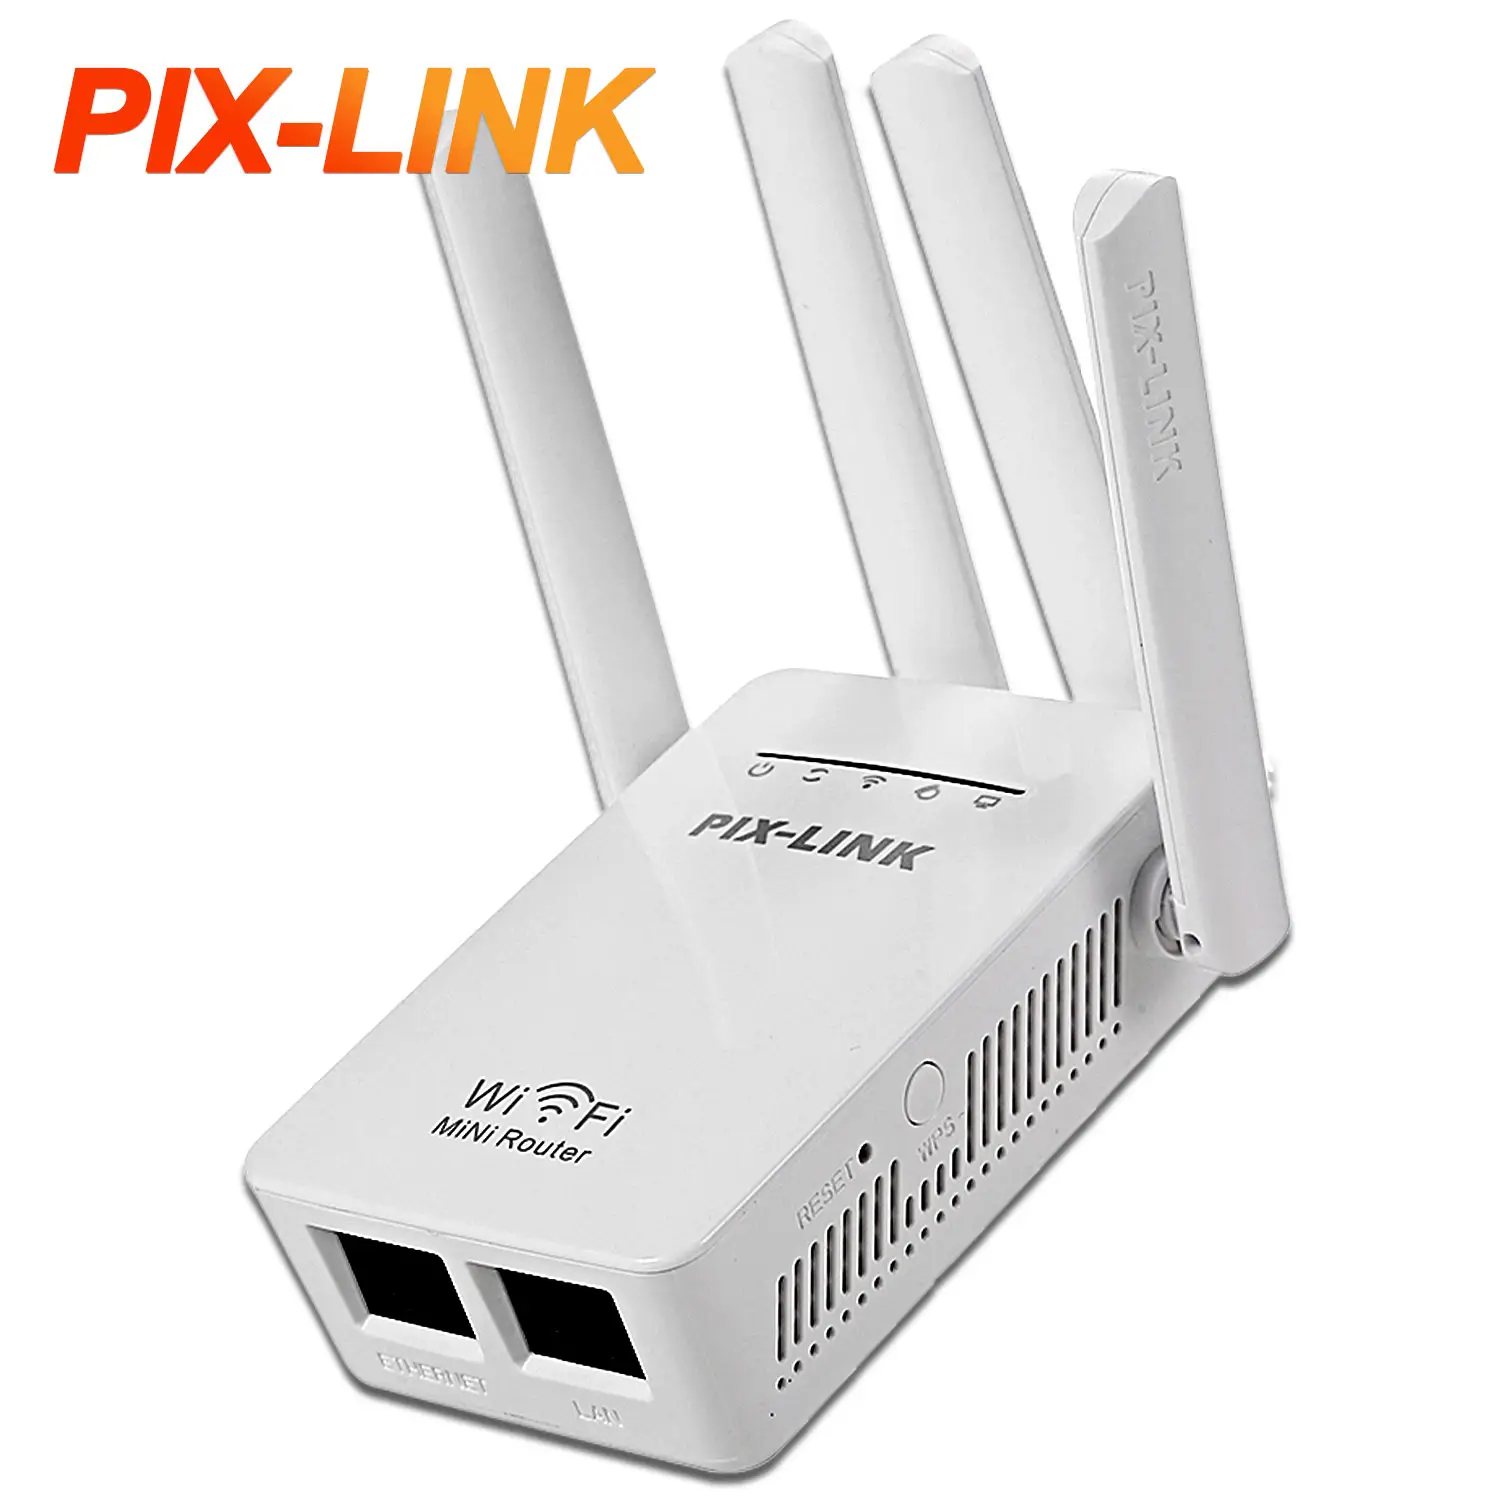 PIX-LINK 2.4G WiFi Repeater Wireless Router Range Network Signal Booster 300Mbps Long Range Signal Wi-Fi Repetidor